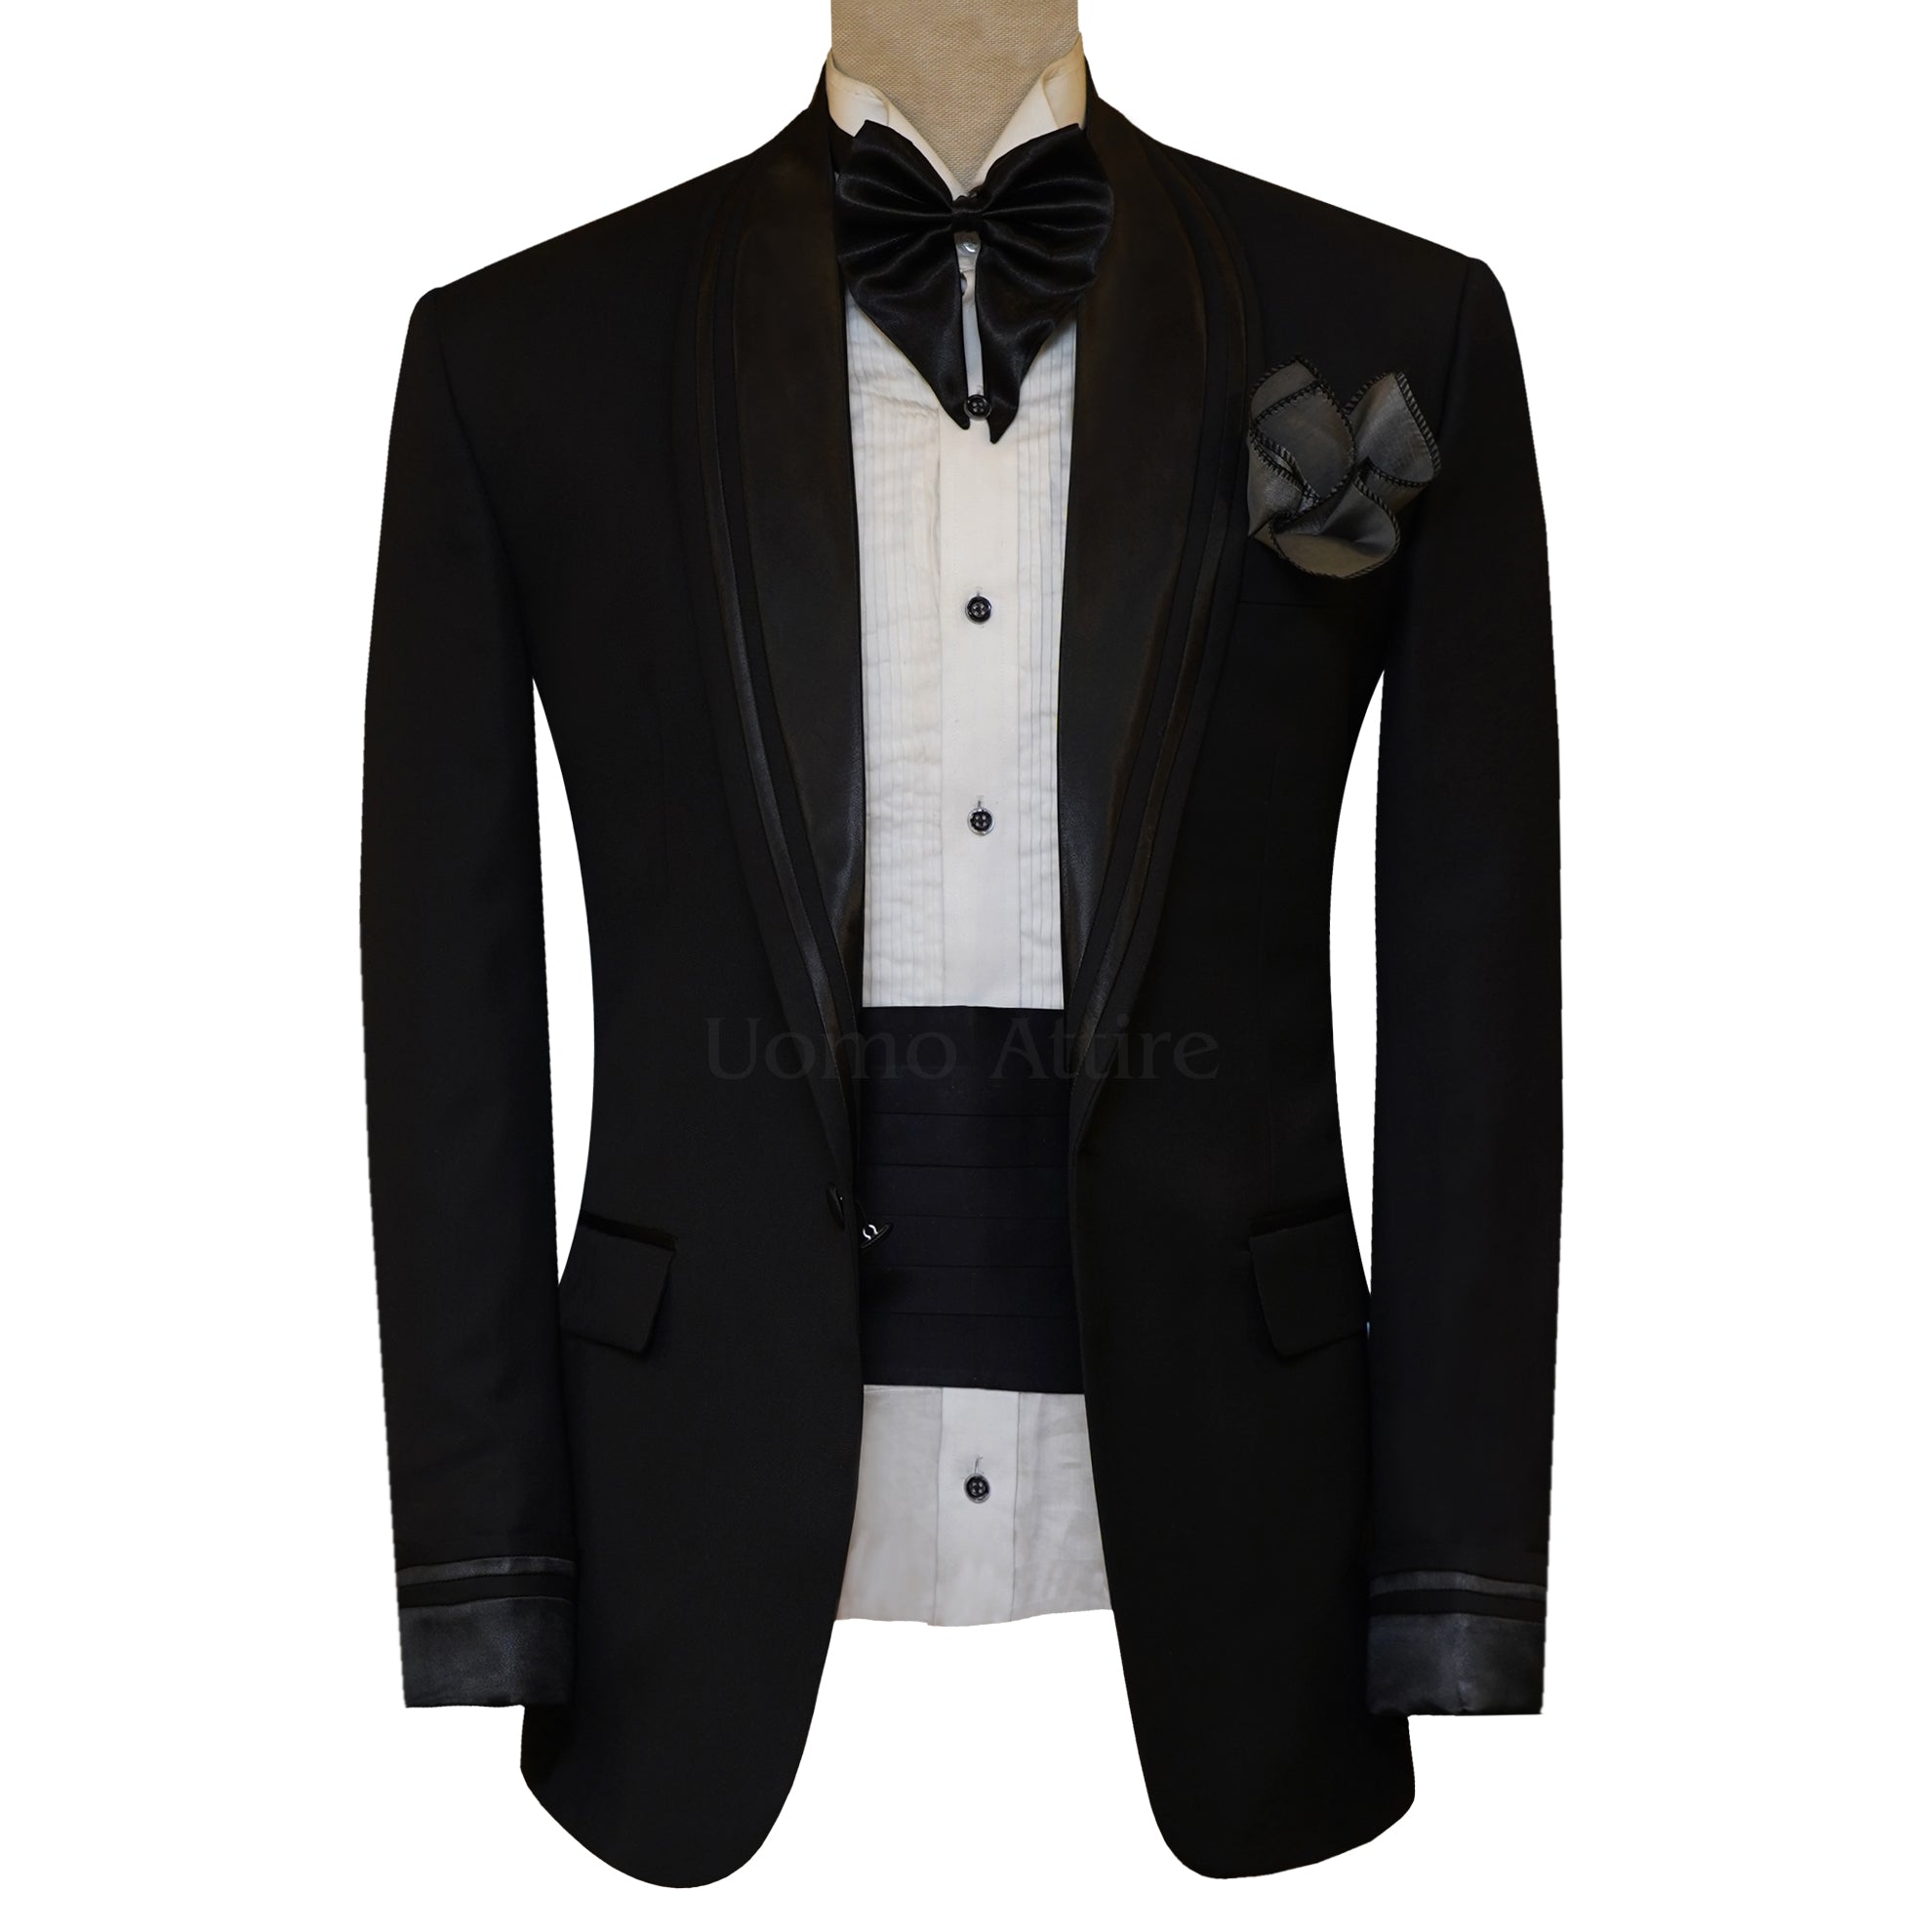 Double Pipping Shawl Collar Black Tuxedo Suit